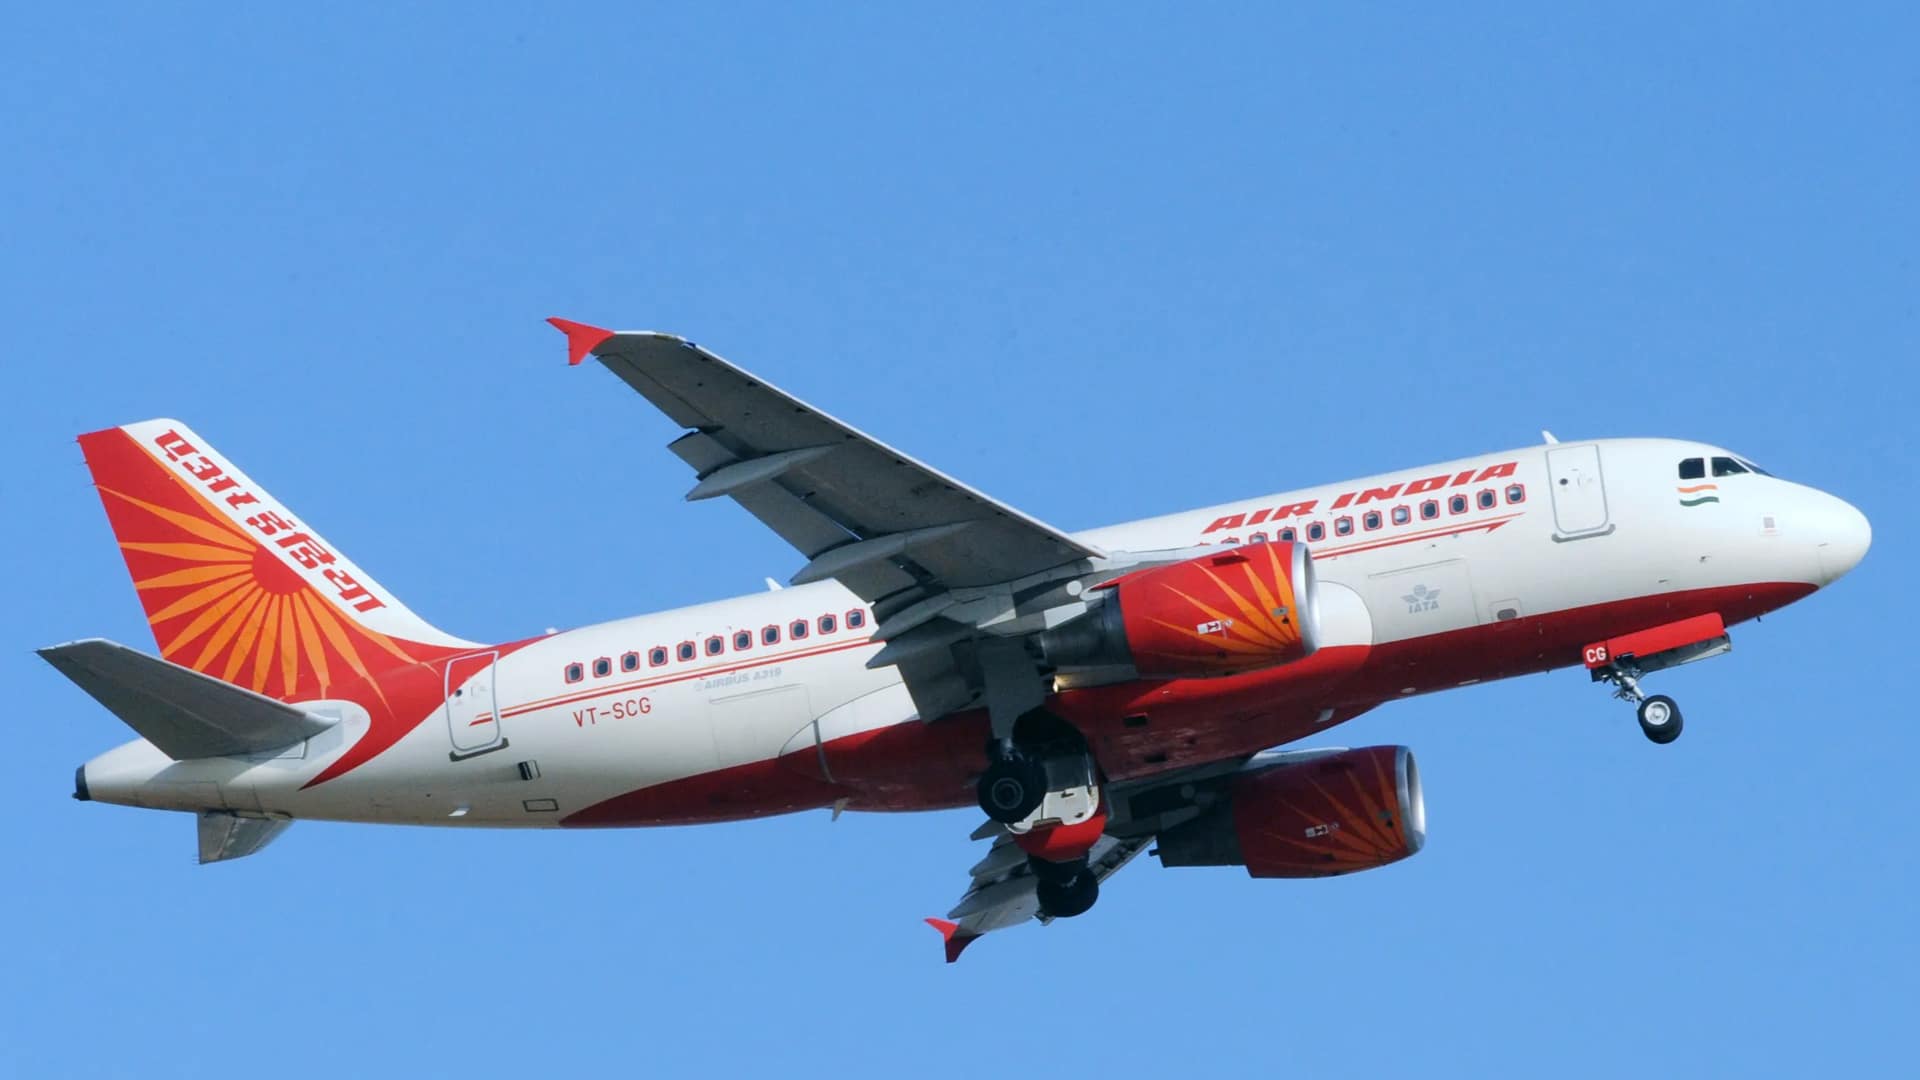 AI incident: DGCA seeks report; airline says reported matter to police